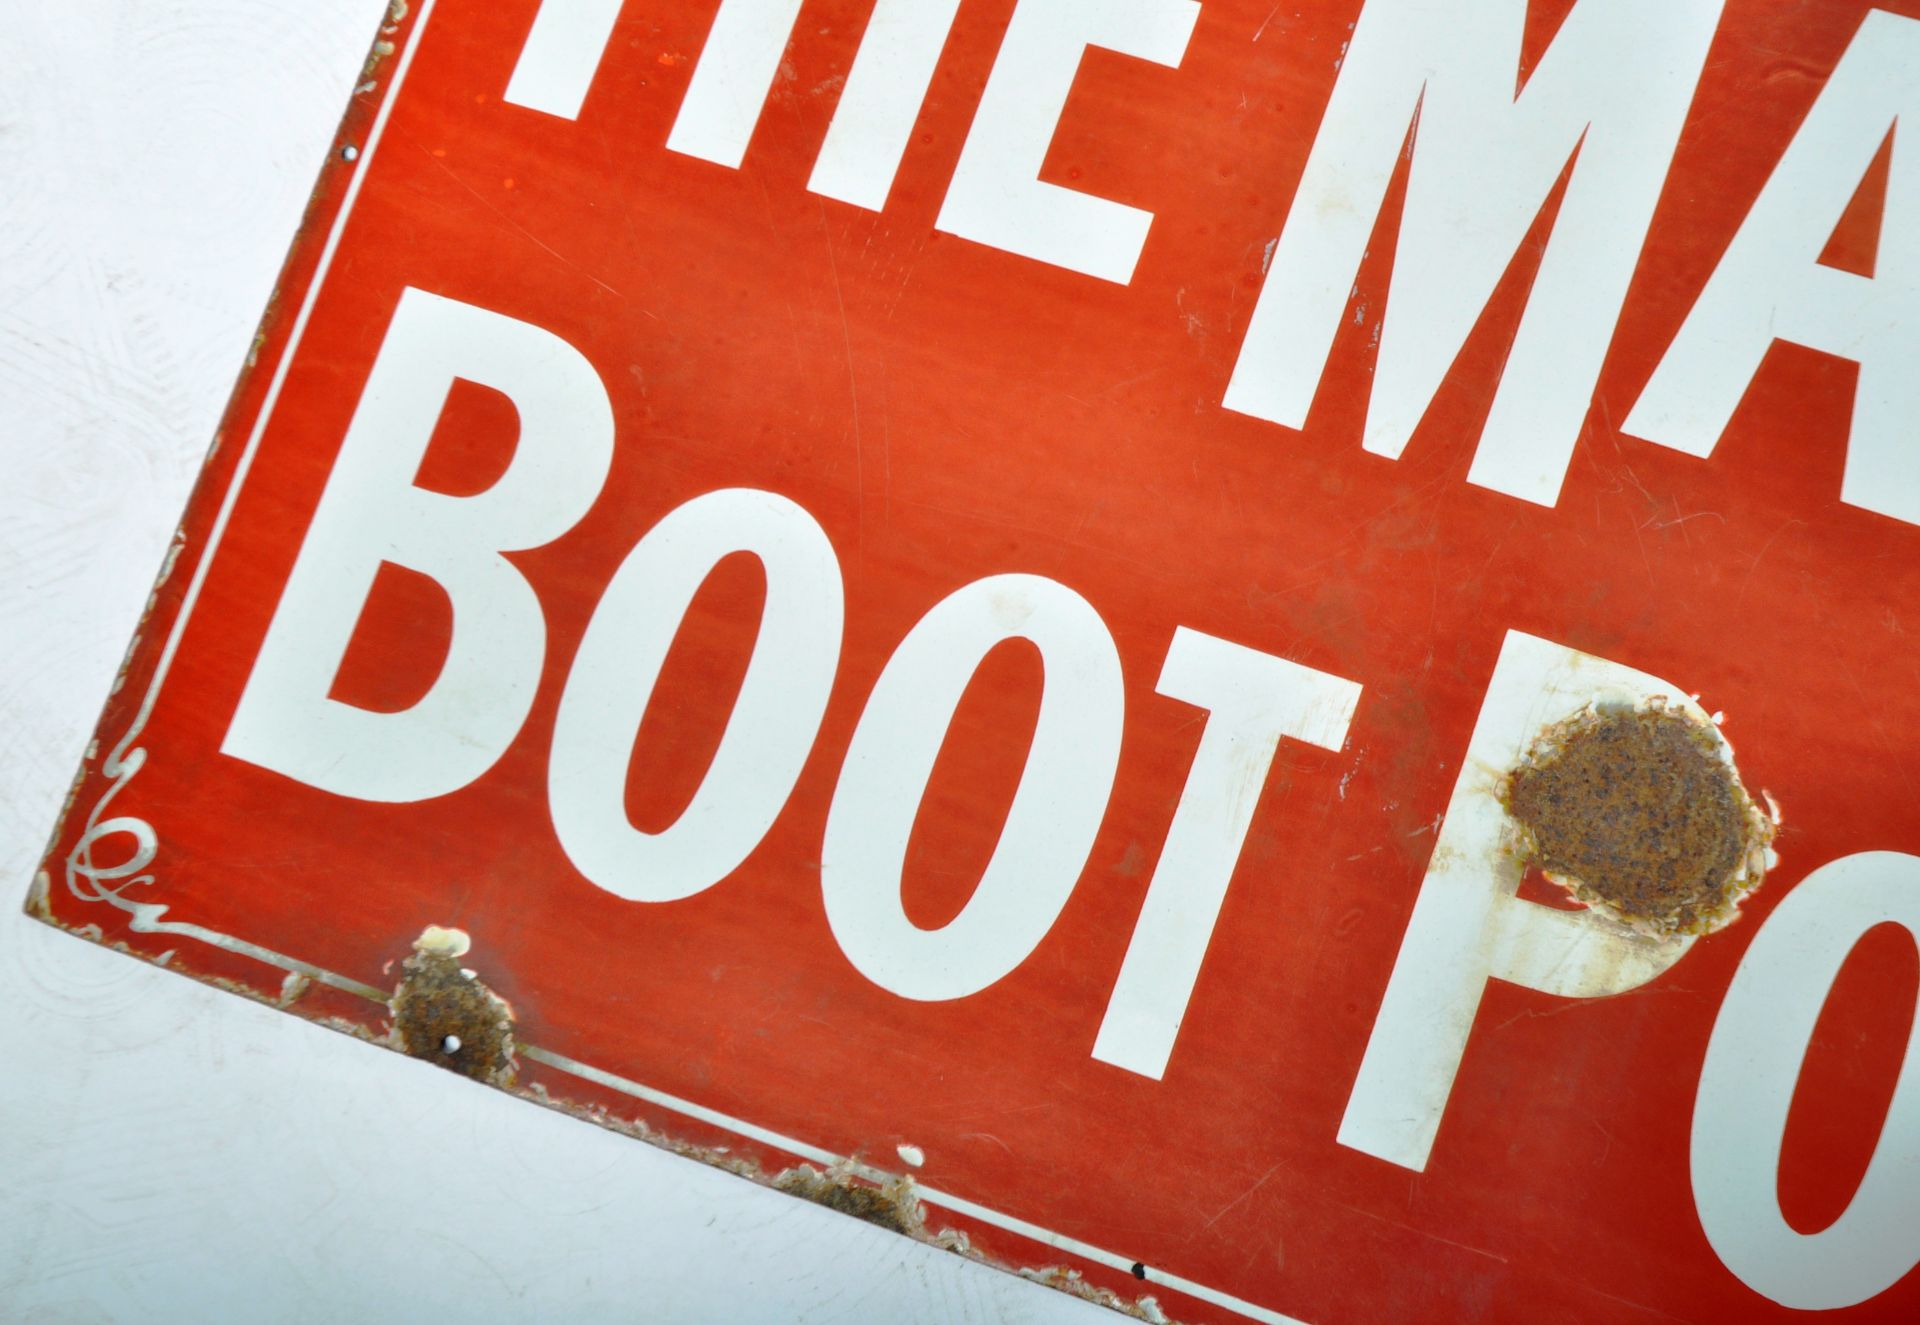 THE MASTERS BOOT POLISH - EARLY 20TH CENTURY ENAMEL SIGN - Image 4 of 6